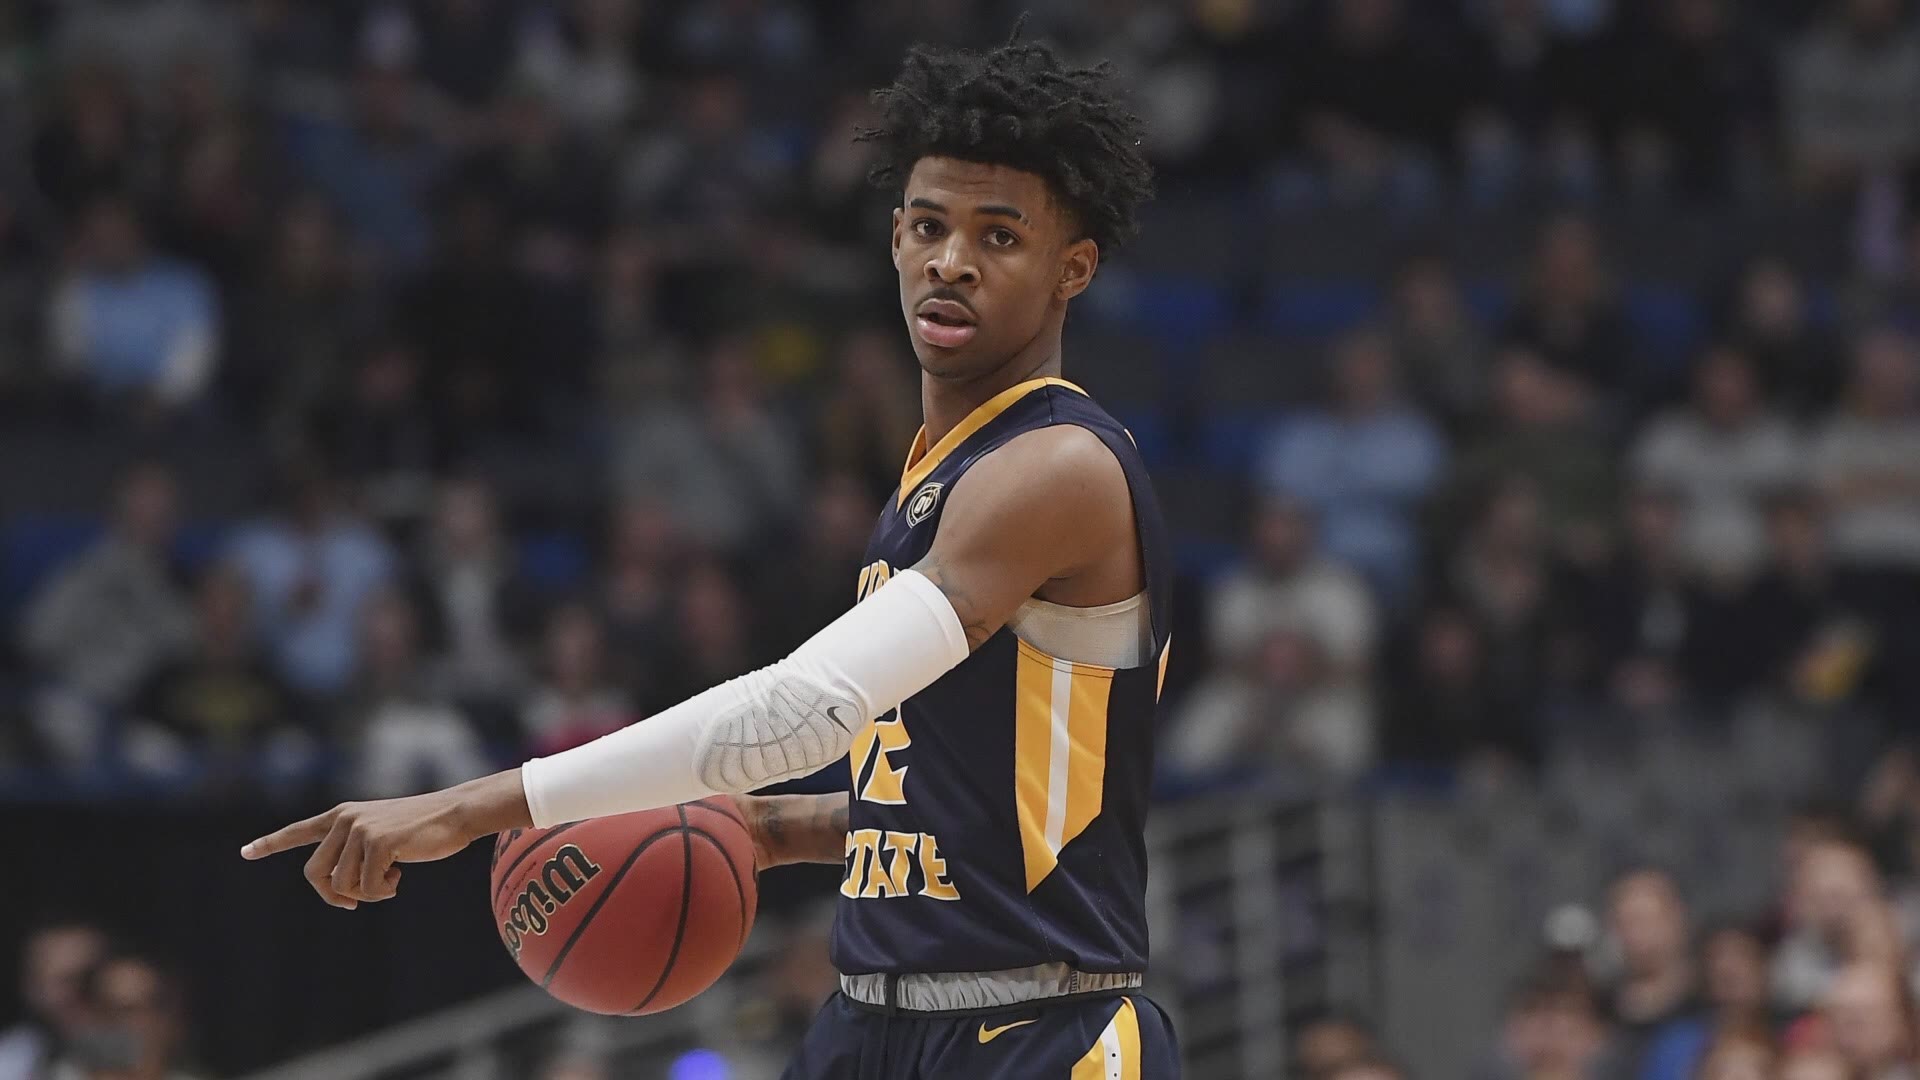 On another special edition of English Lessons NBA Hall Of Famer Alex English breaks down the game and talent of Crestwood product Ja Morant. Ja, the OVC Player of the Year out of Murray State, is projected to be the second overall pick in the NBA Draft.